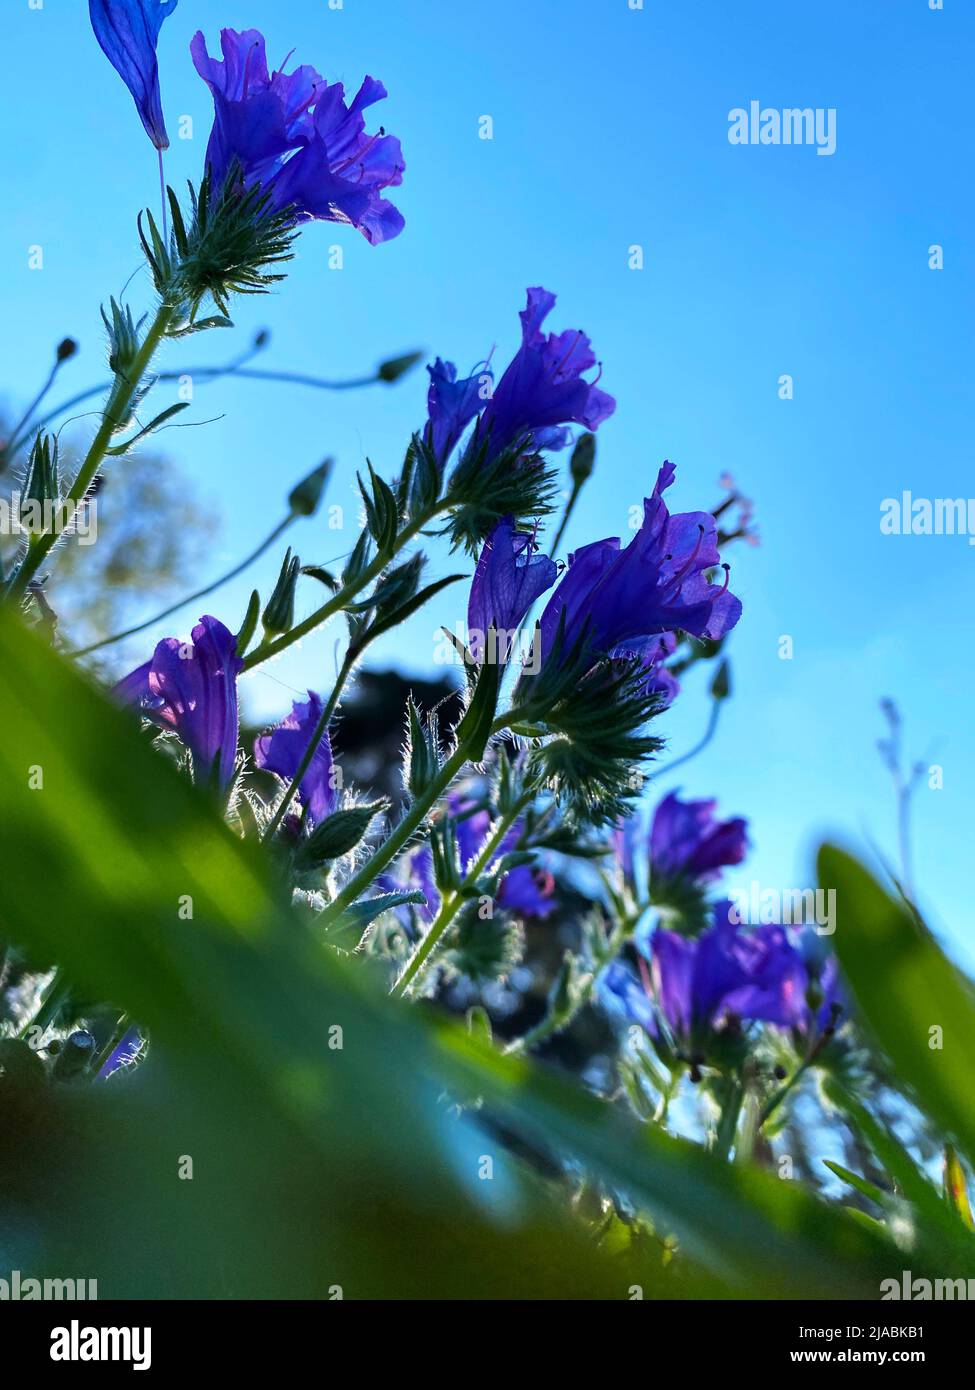 Purple flowers and the blue sky. image with copy space, can be background with front focus. Stock Photo